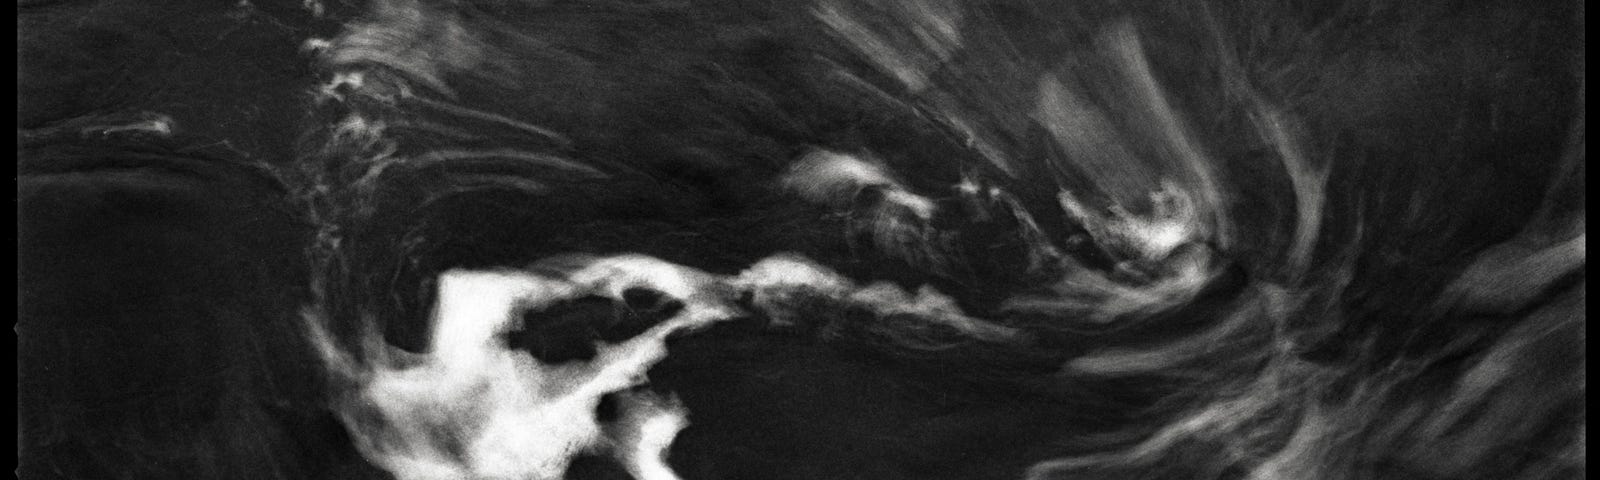 A black and white film photograph showing white swirling sea foam against a dark gray ocean.